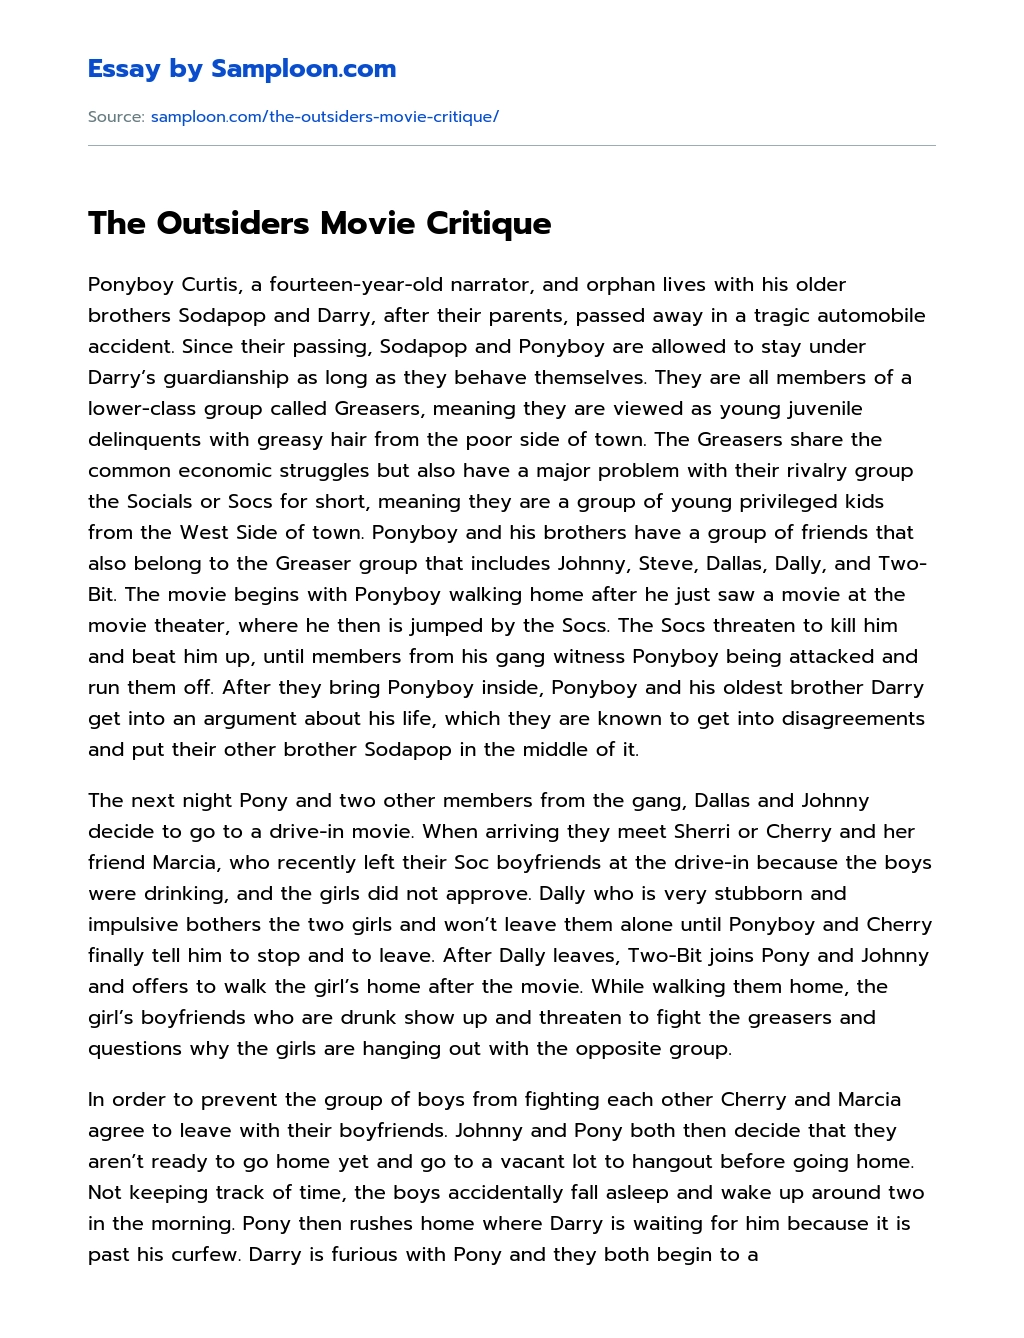 The Outsiders Movie Critique essay